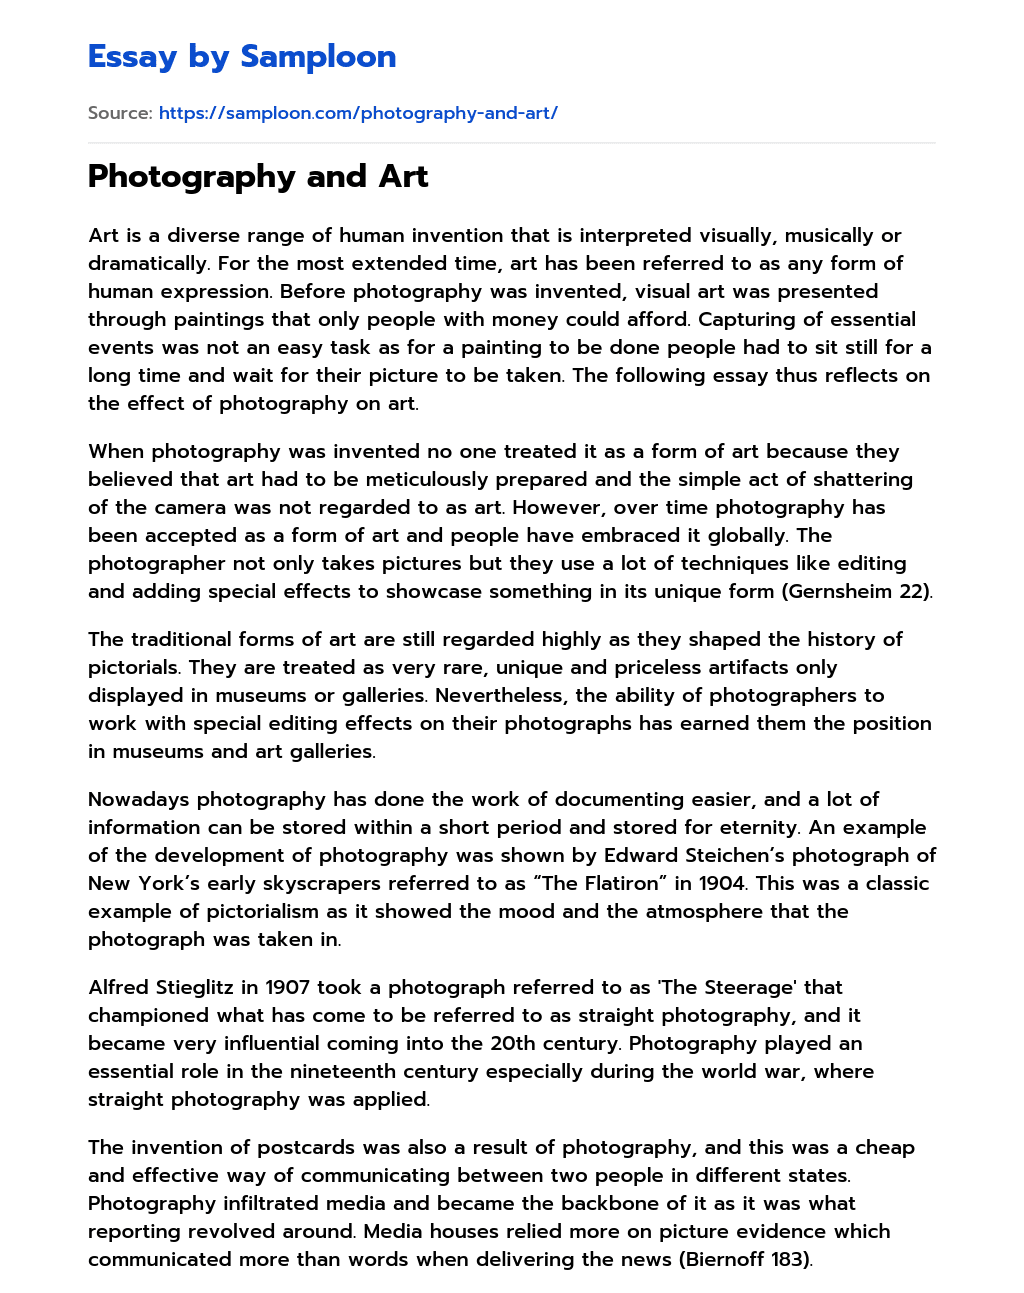 Photography and Art essay